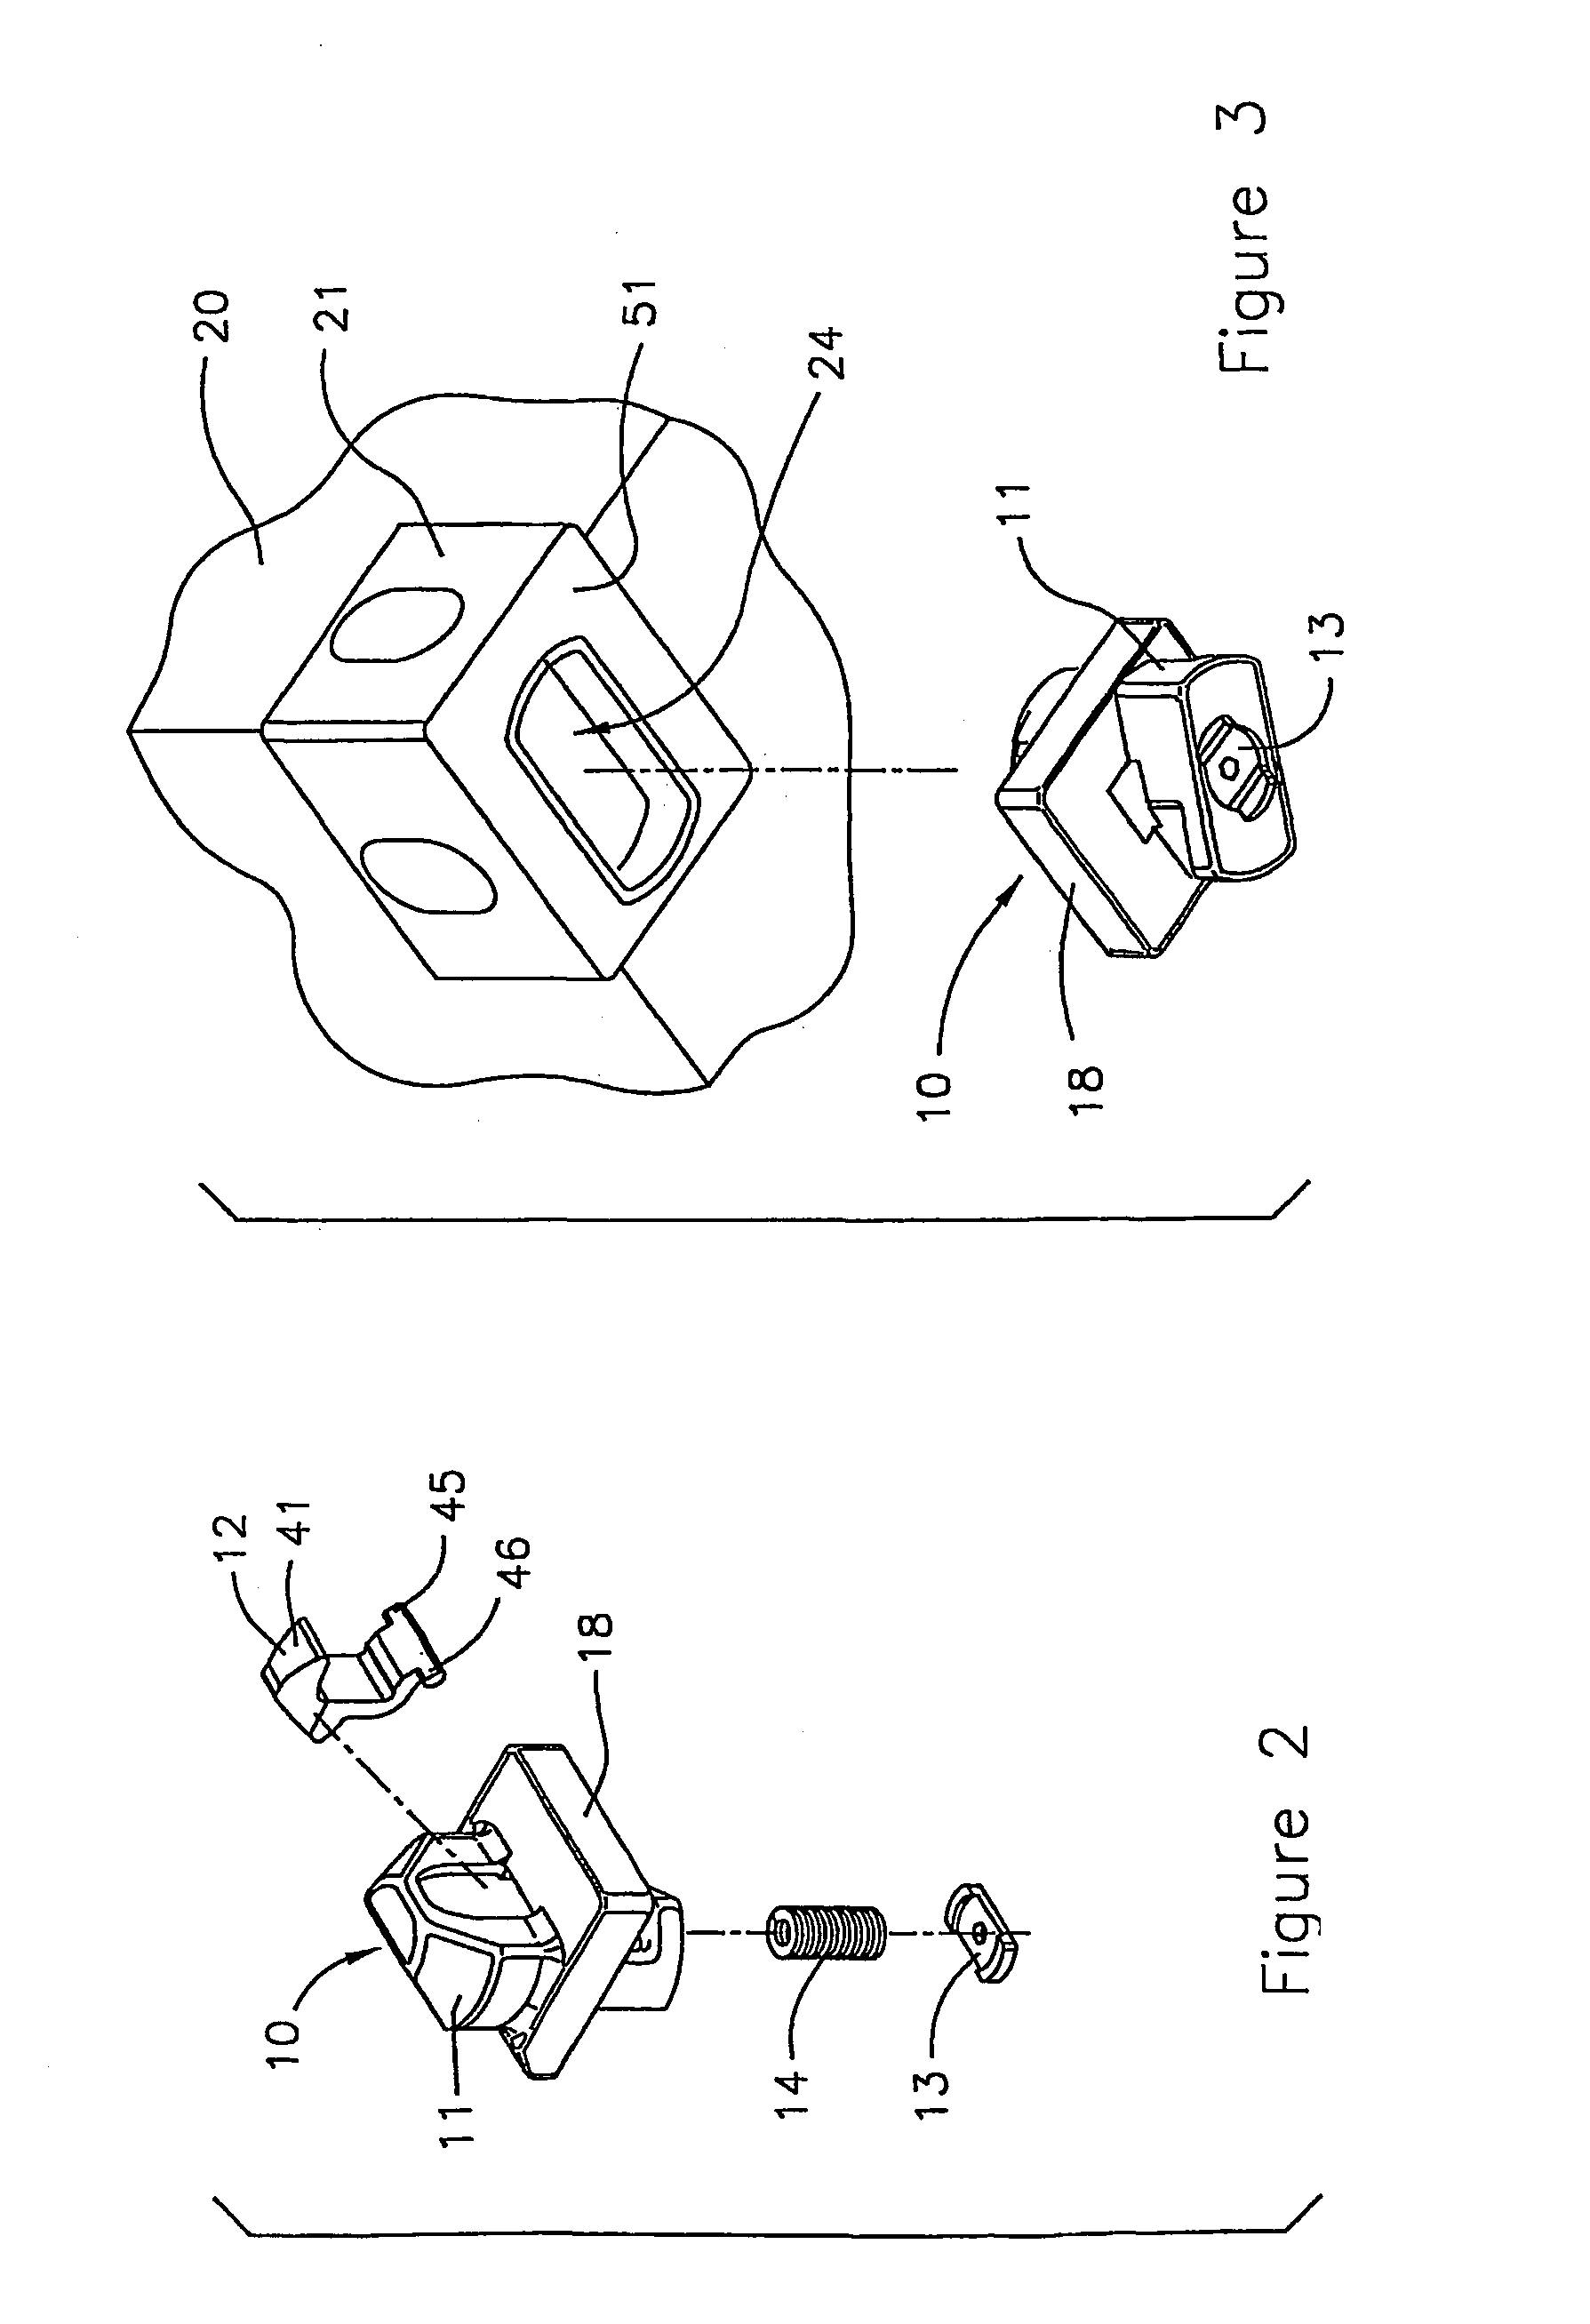 Latch device for securing cargo containers together and/or to vehicle decks